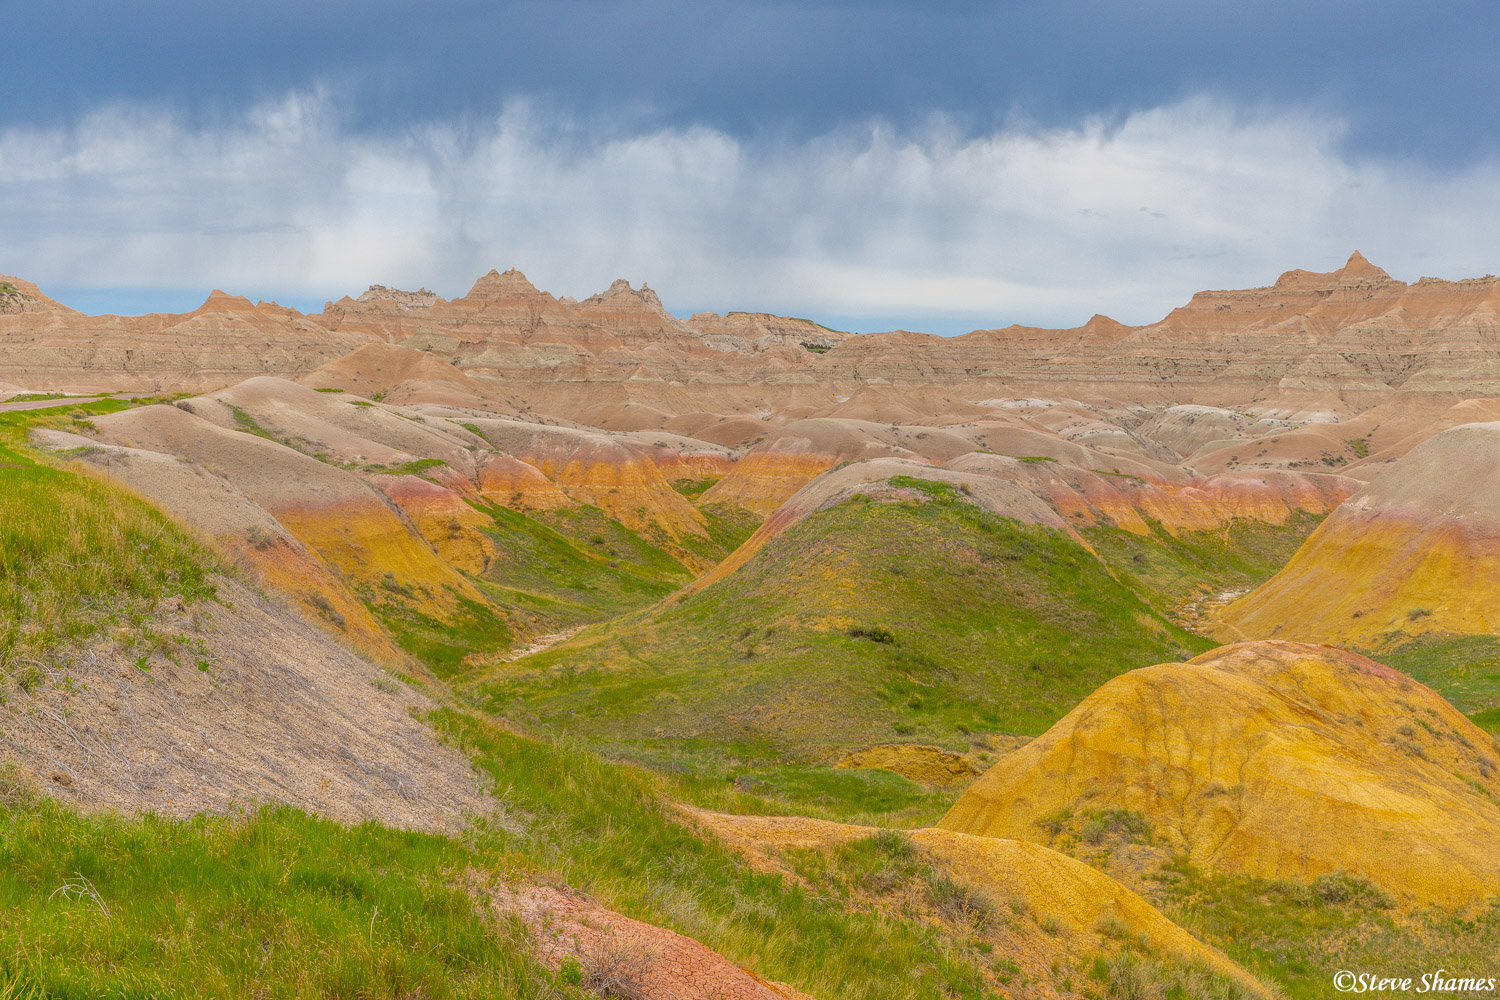 And here is a glimpse of the Badlands from Conata Basin Overlook.